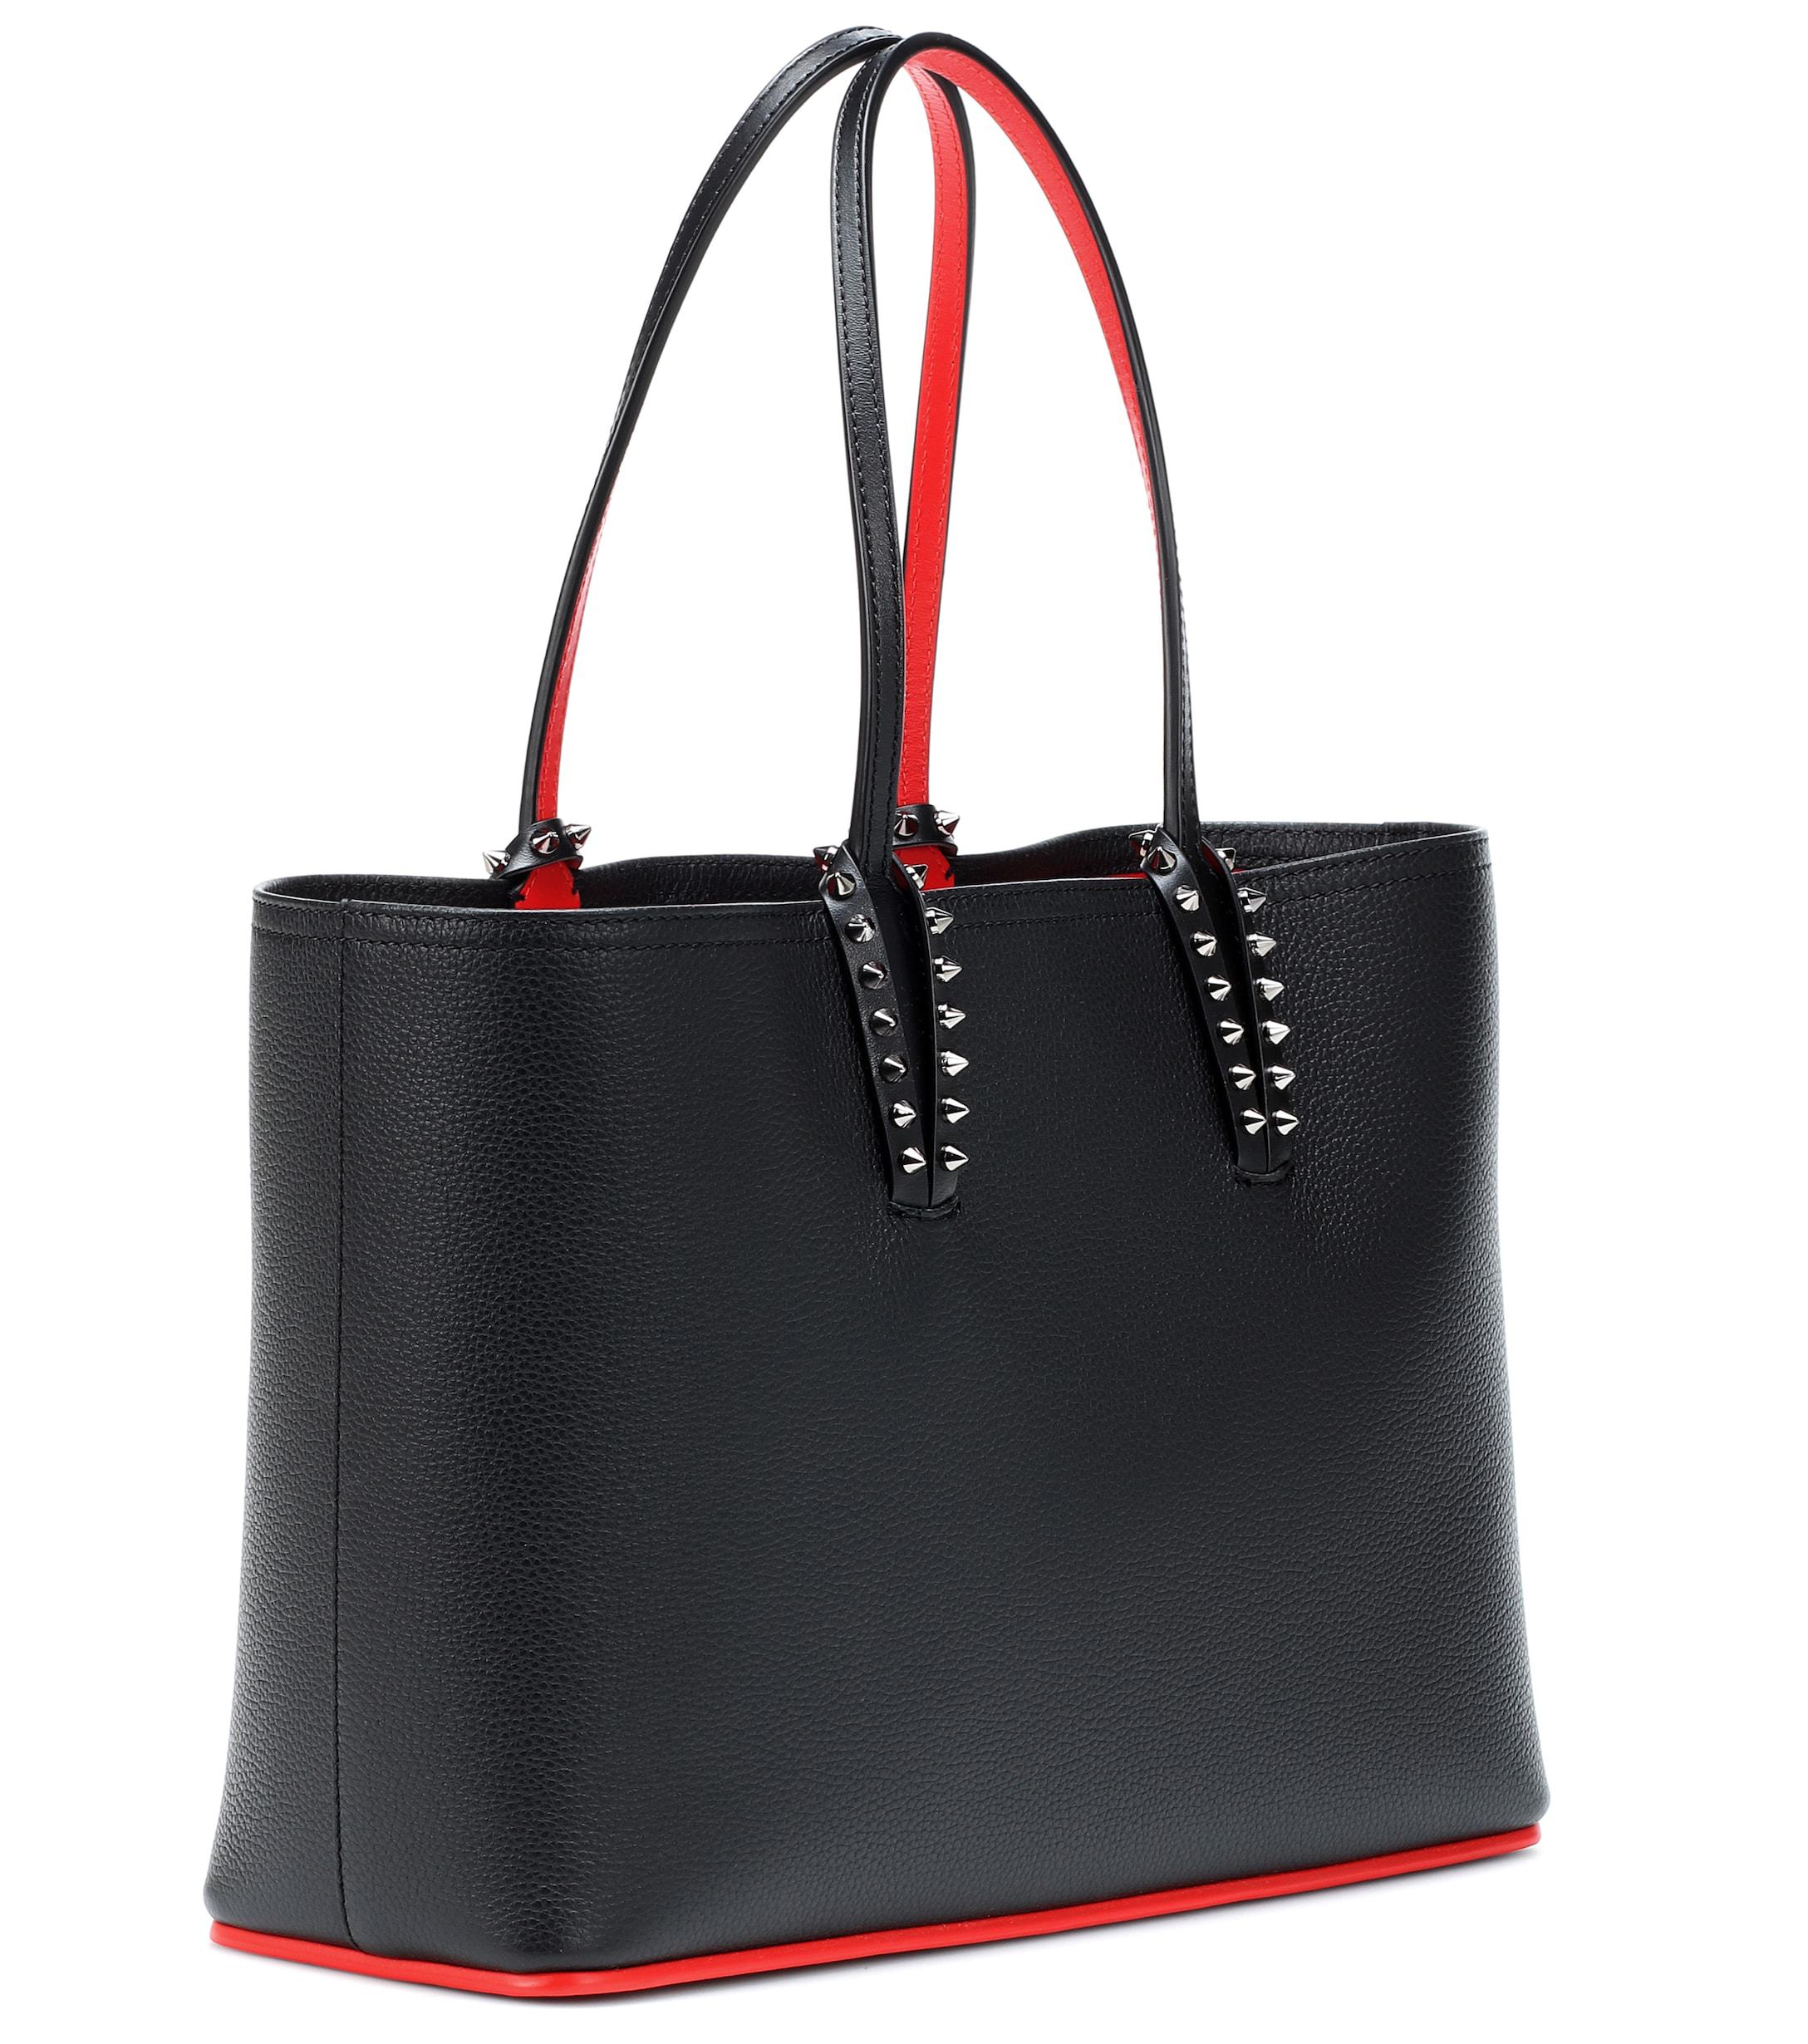 Christian Louboutin Cabata Small Leather Tote in Black,Black (Black) - Lyst